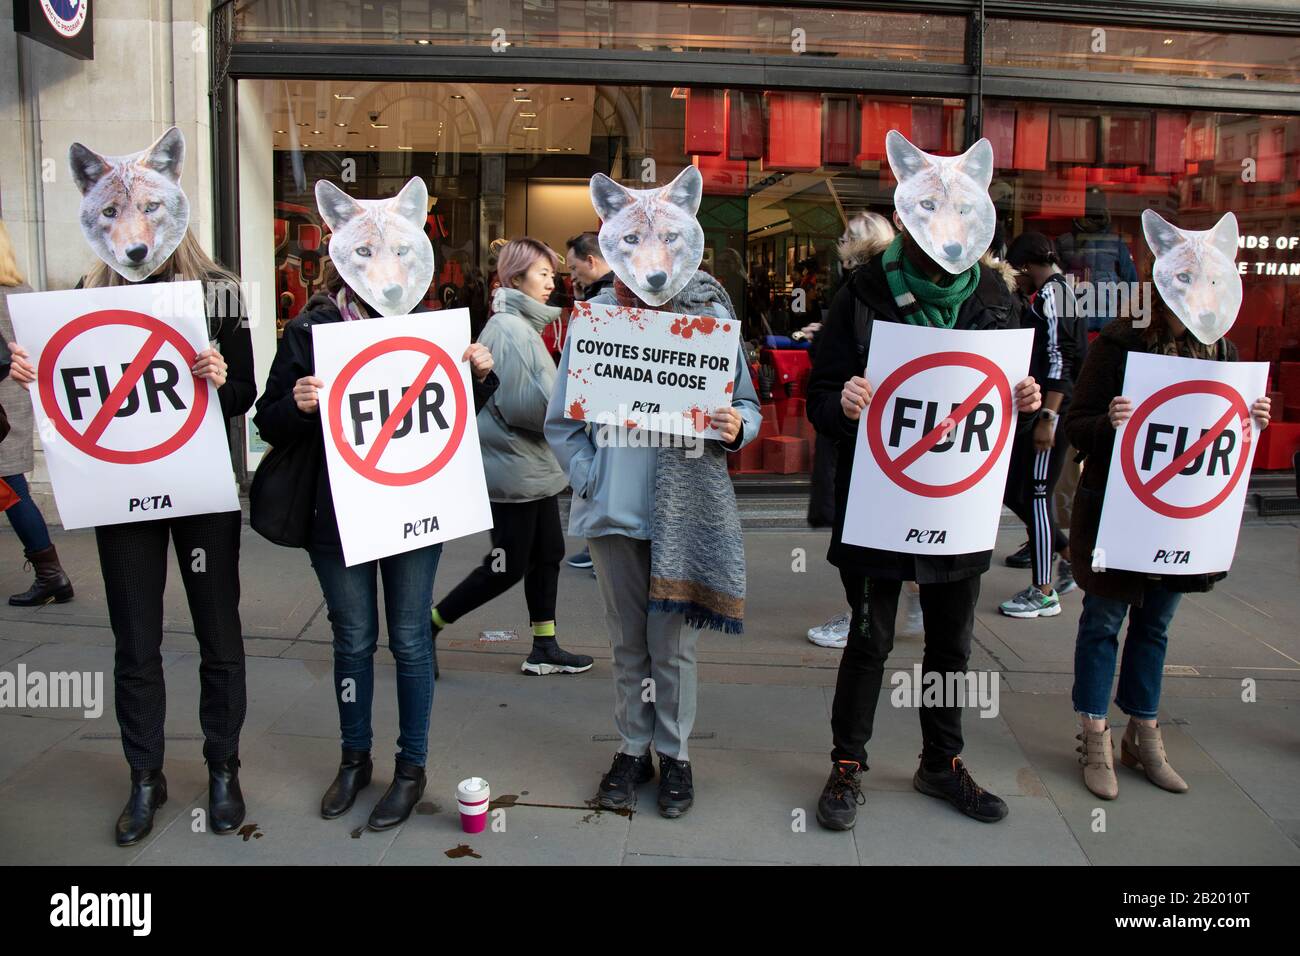 Protesters against animal cruelty wearing Coyote masks in protest outside  the Canada Goose shop on Regent Street due to the fashion companys use of coyote  fur in some of their products on